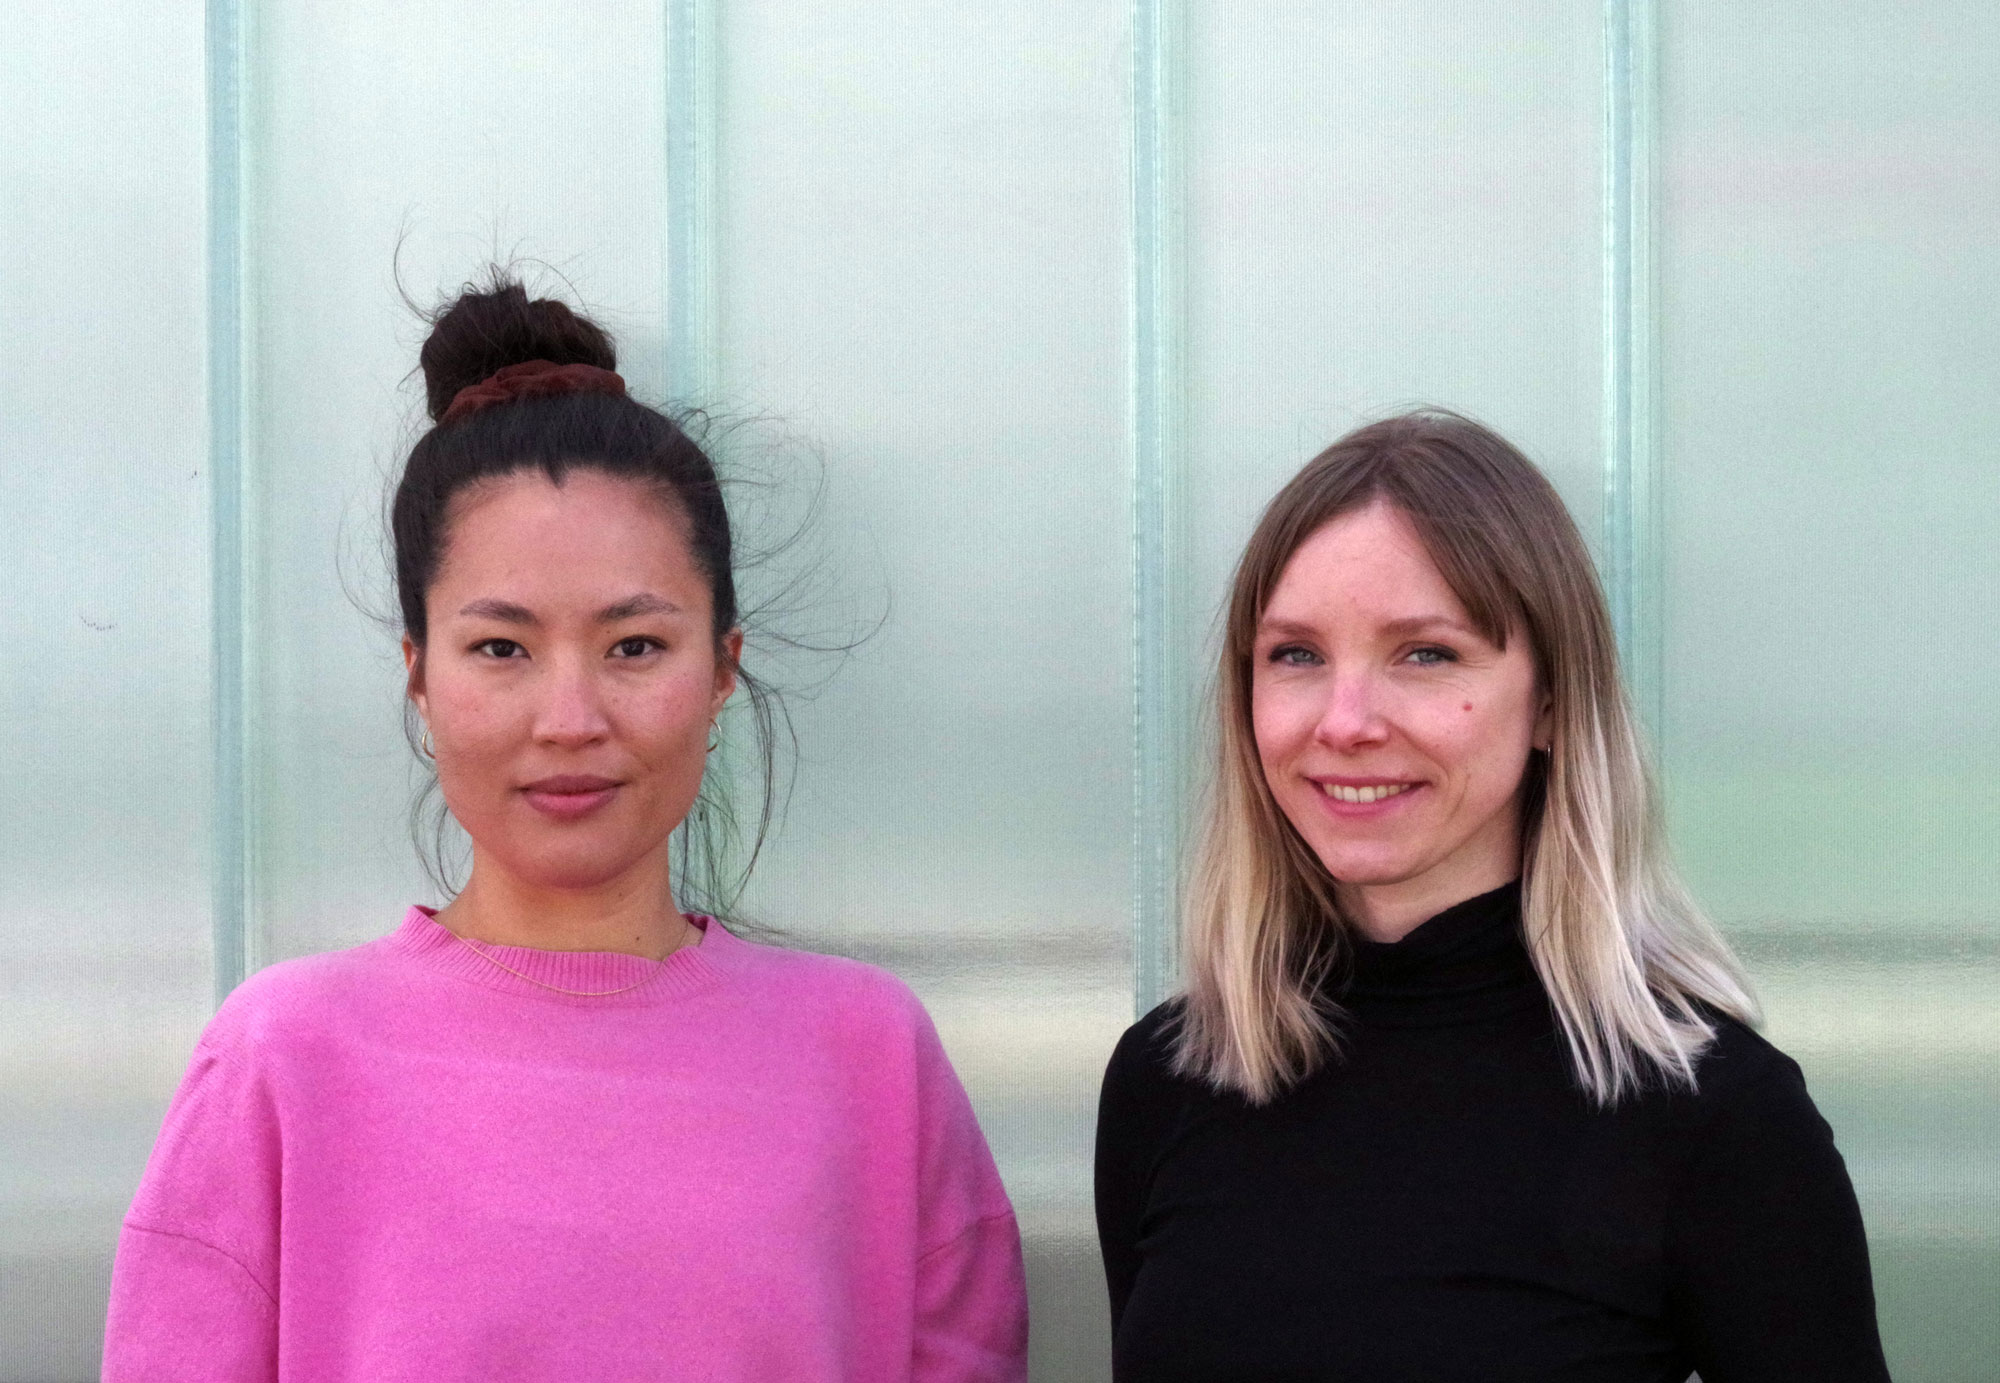 INTO STORIES co-founder Sophia Frommel and Romina Falk